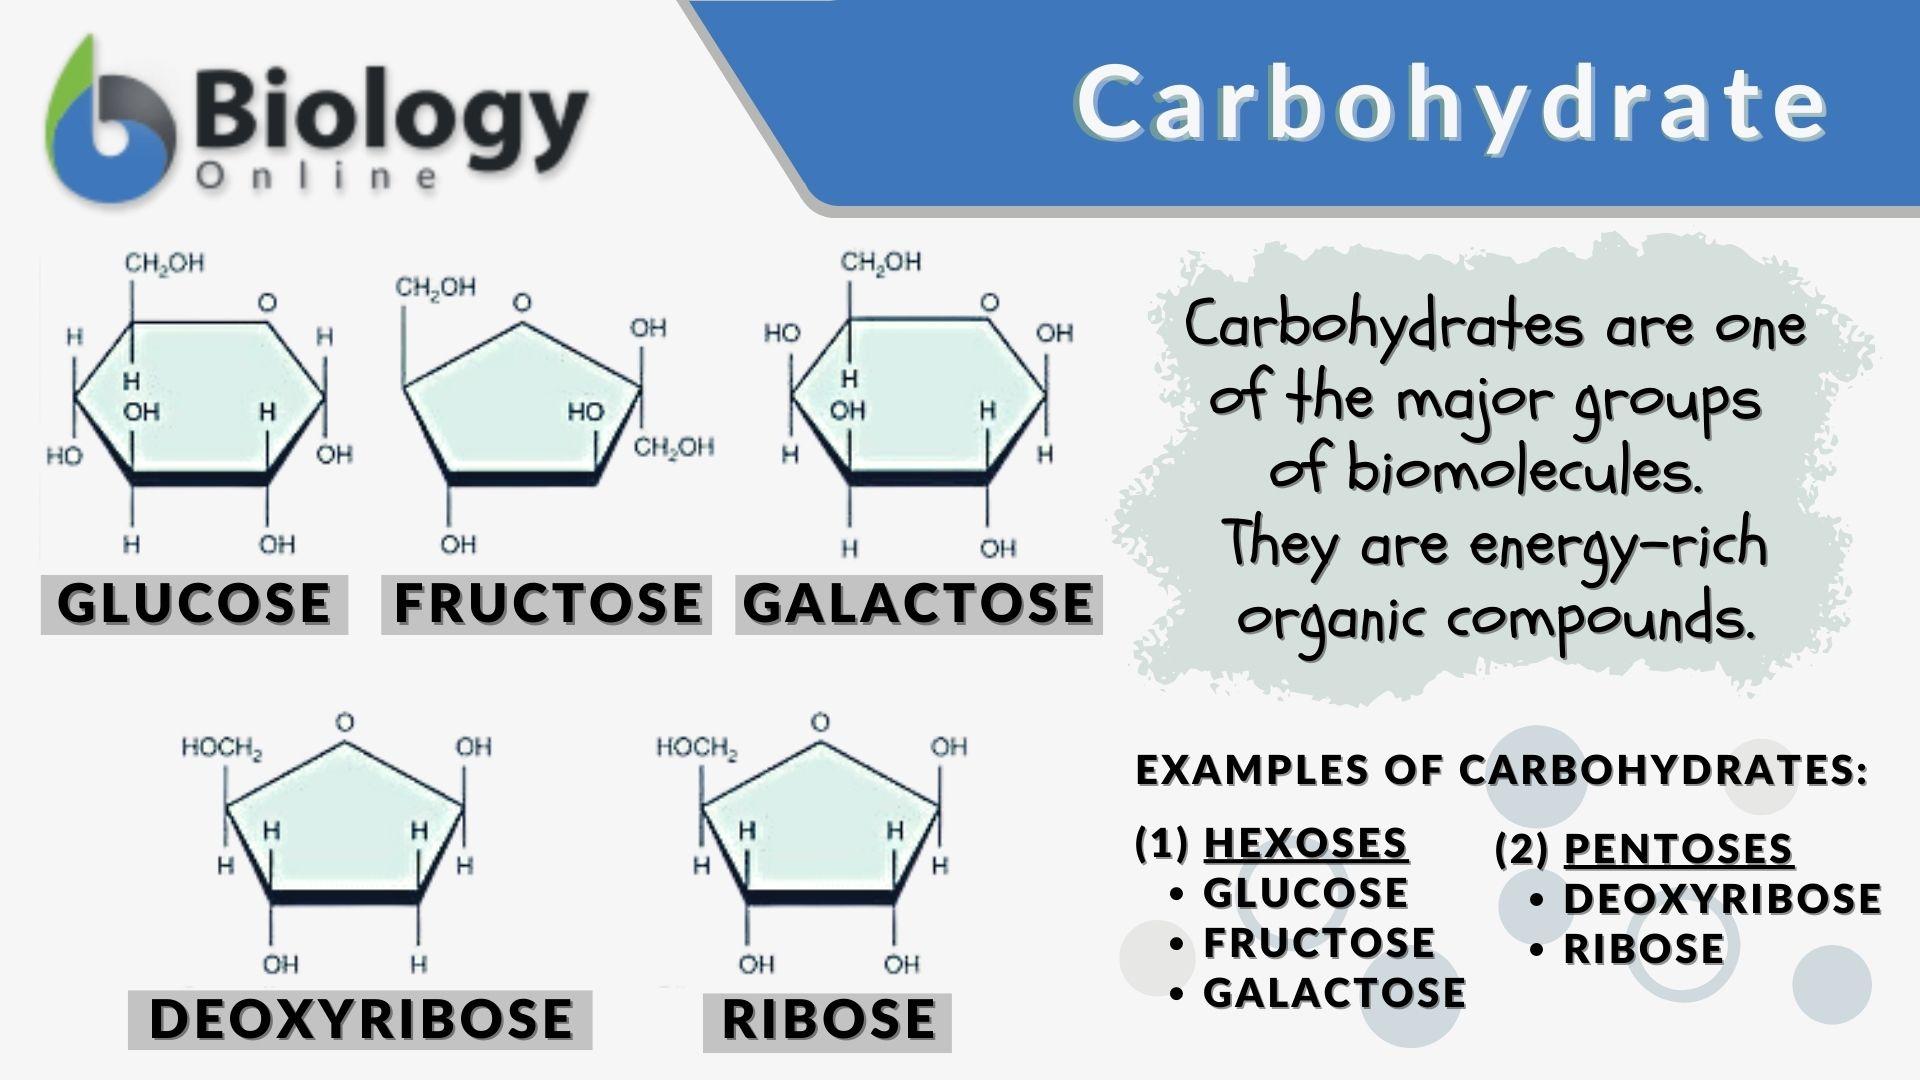 Carbohydrate Definition and Examples - Biology Online Dictionary